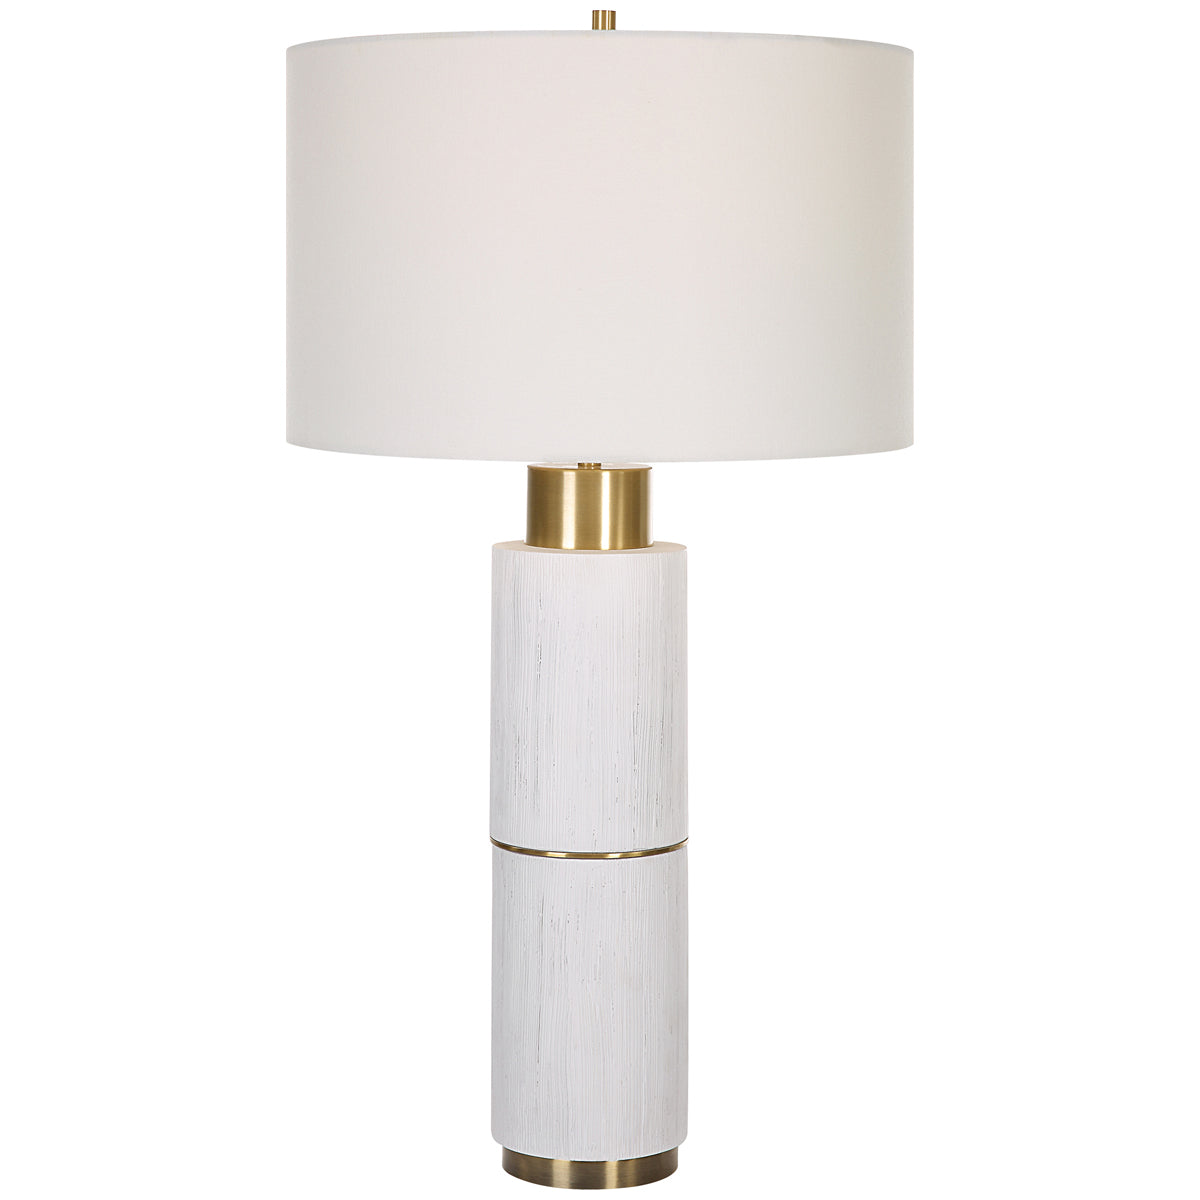 Uttermost Ruse Whitewashed Table Lamp